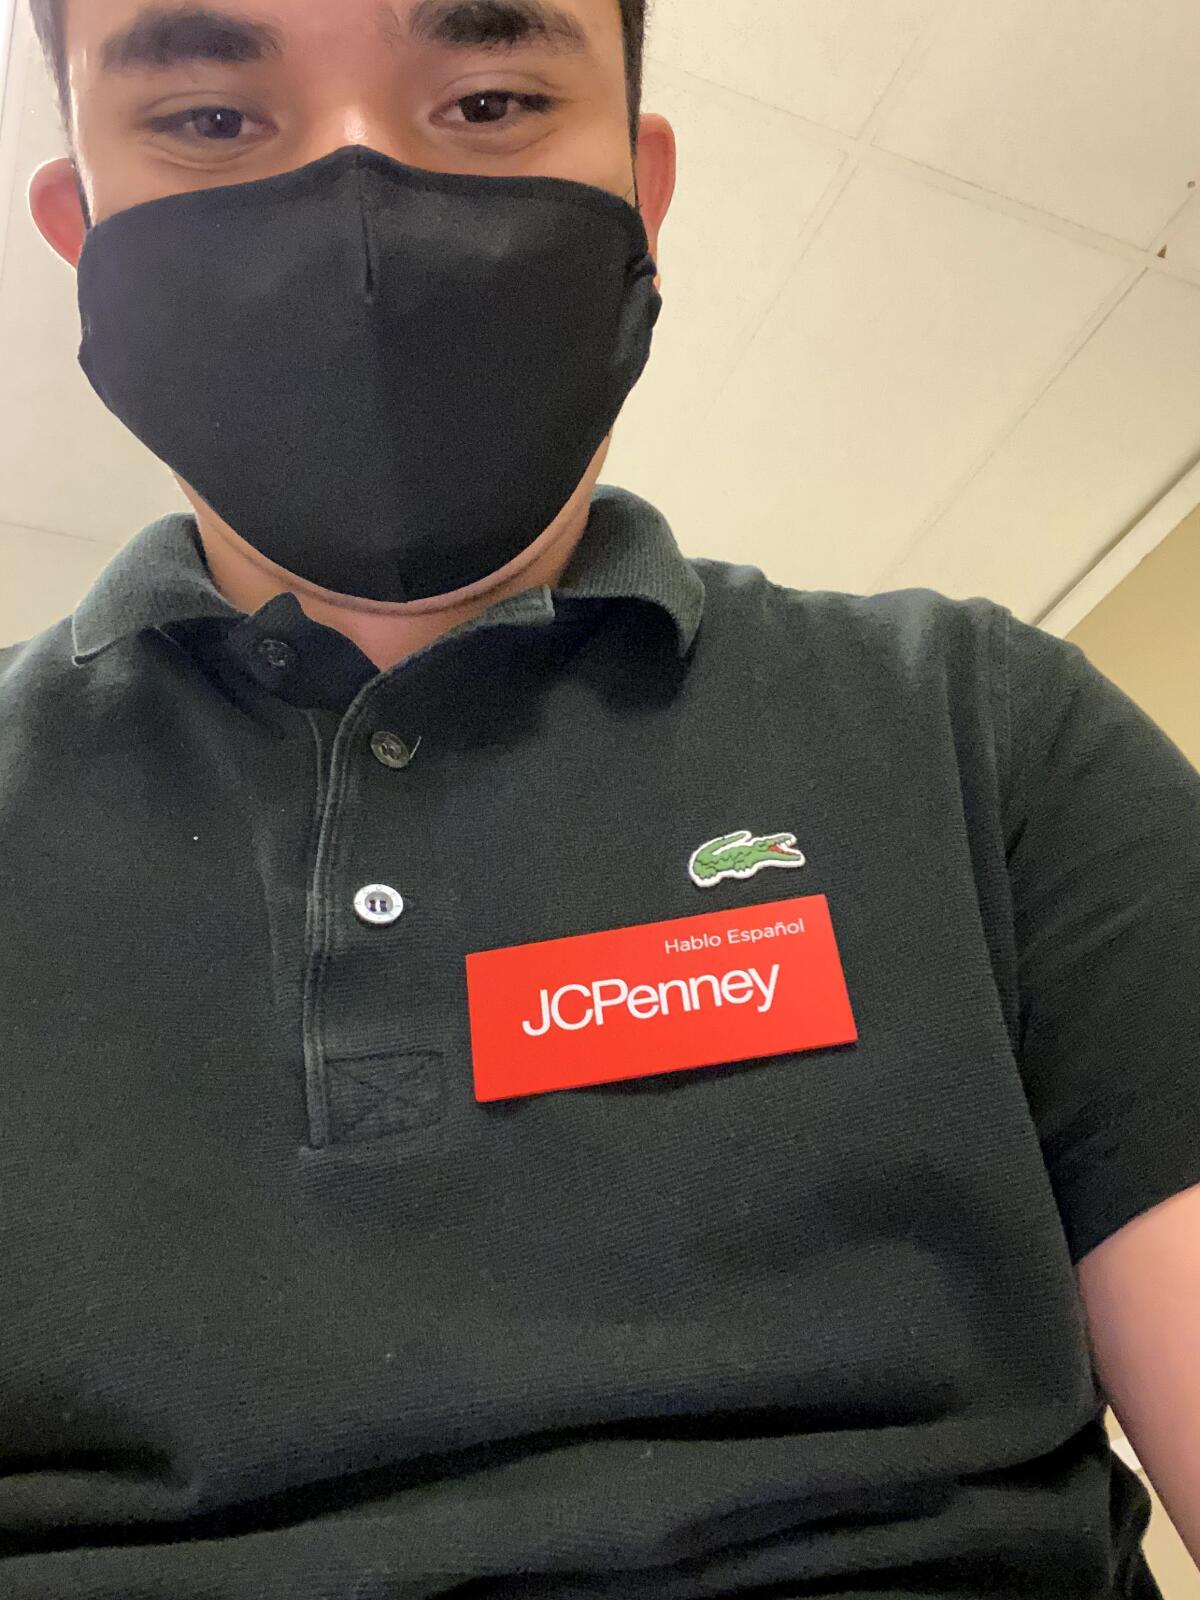 Antonio Solorio in a mask and wearing a JCPenney name tag.